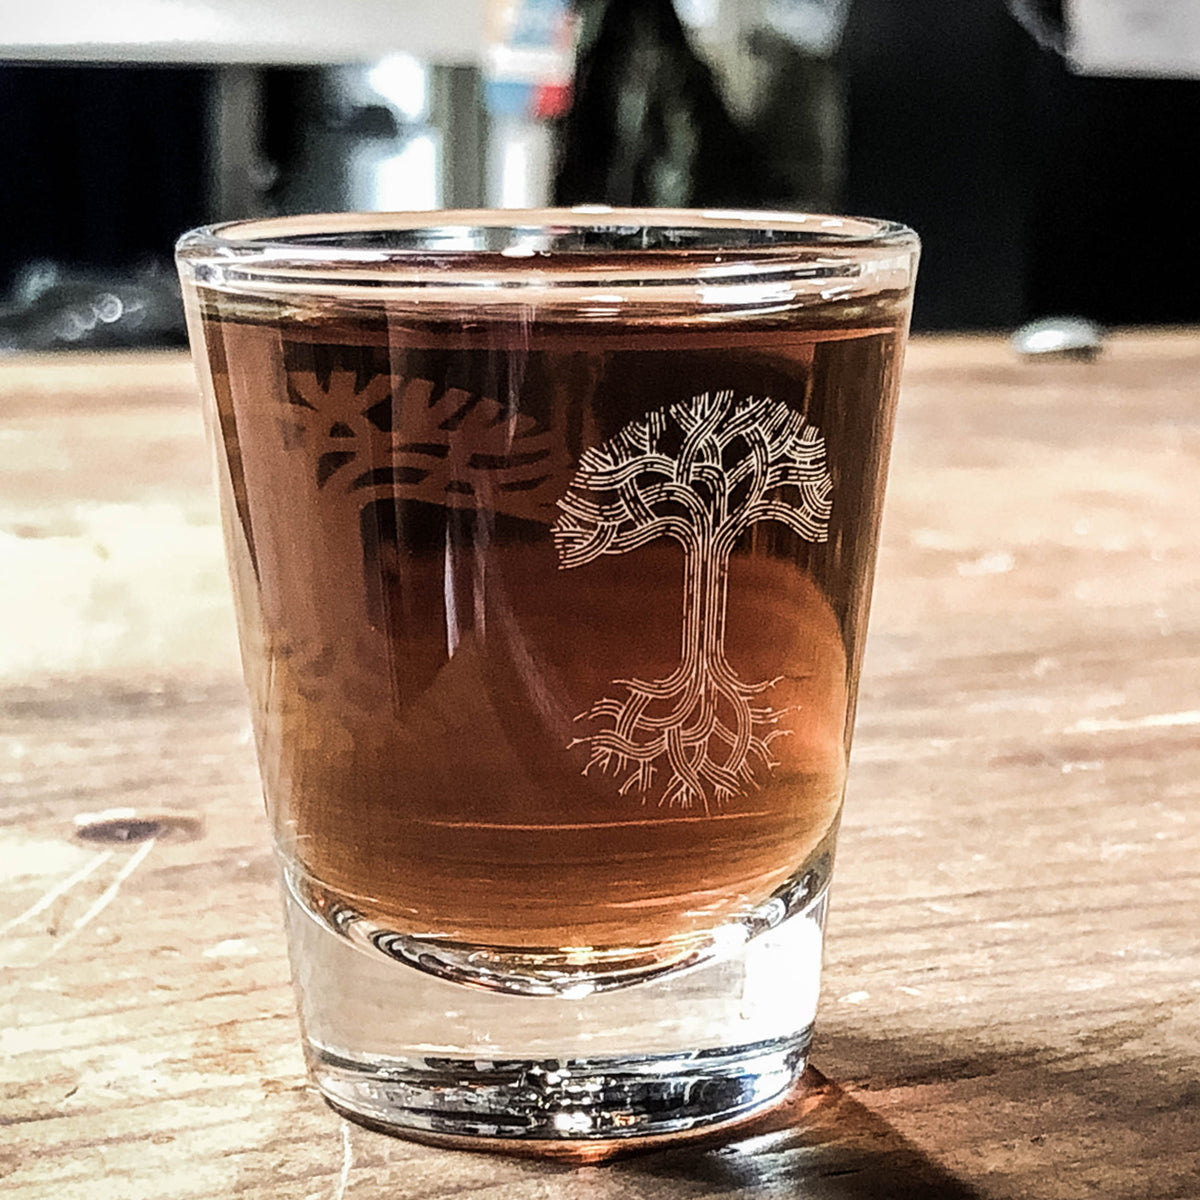 Clear glass shot glass with translucent Oaklandish tree logo full of brown liquor on a wood picnic table.